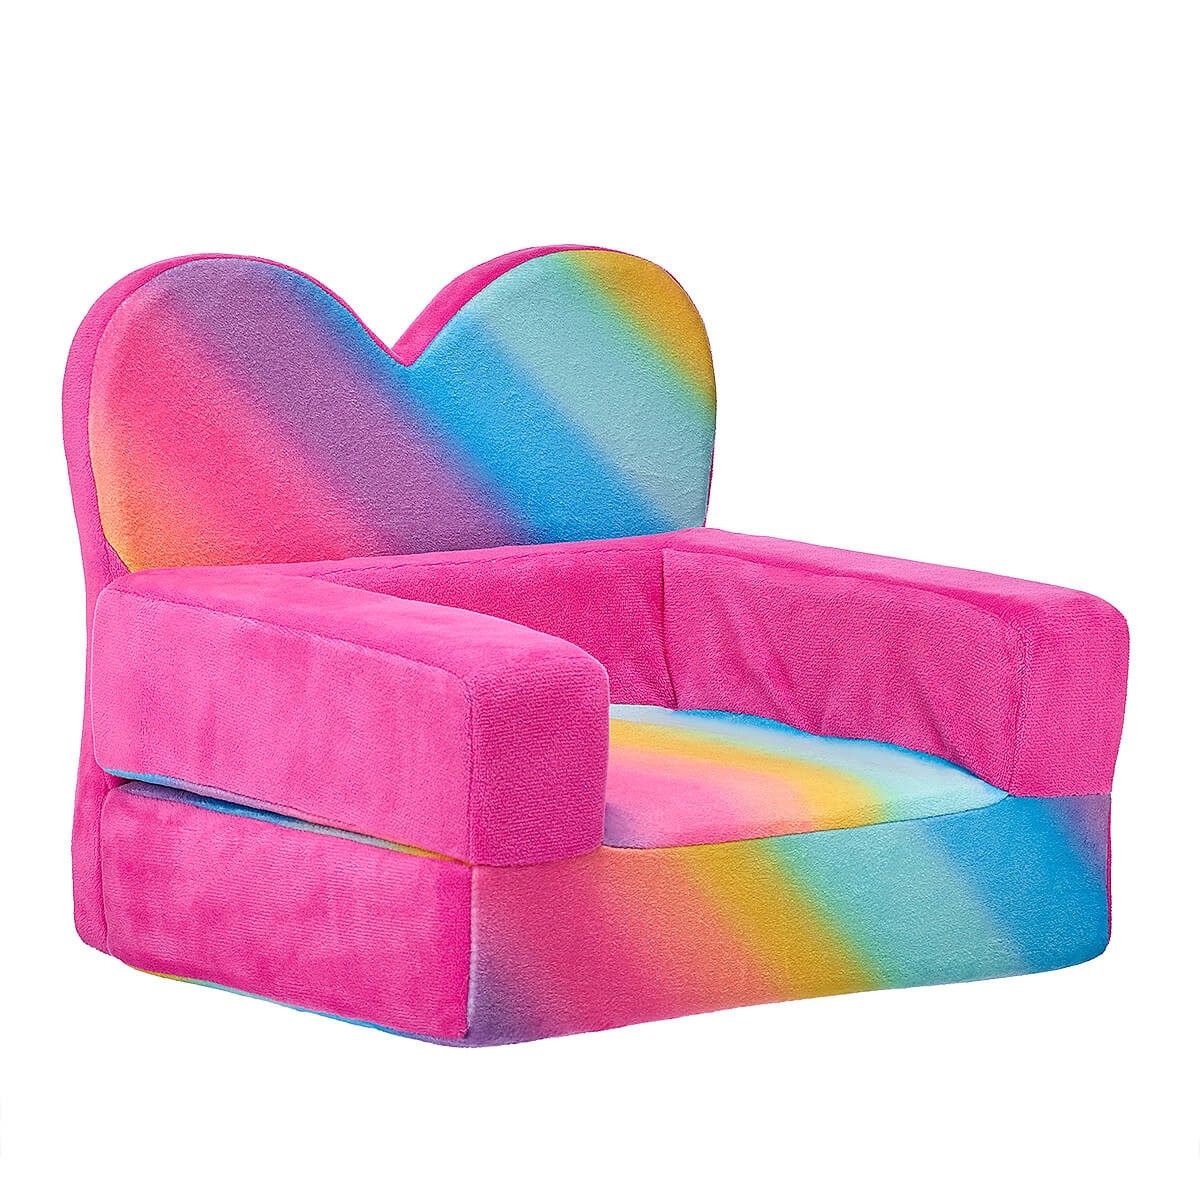 Rainbow heart chair bed for stuffed animals shop at